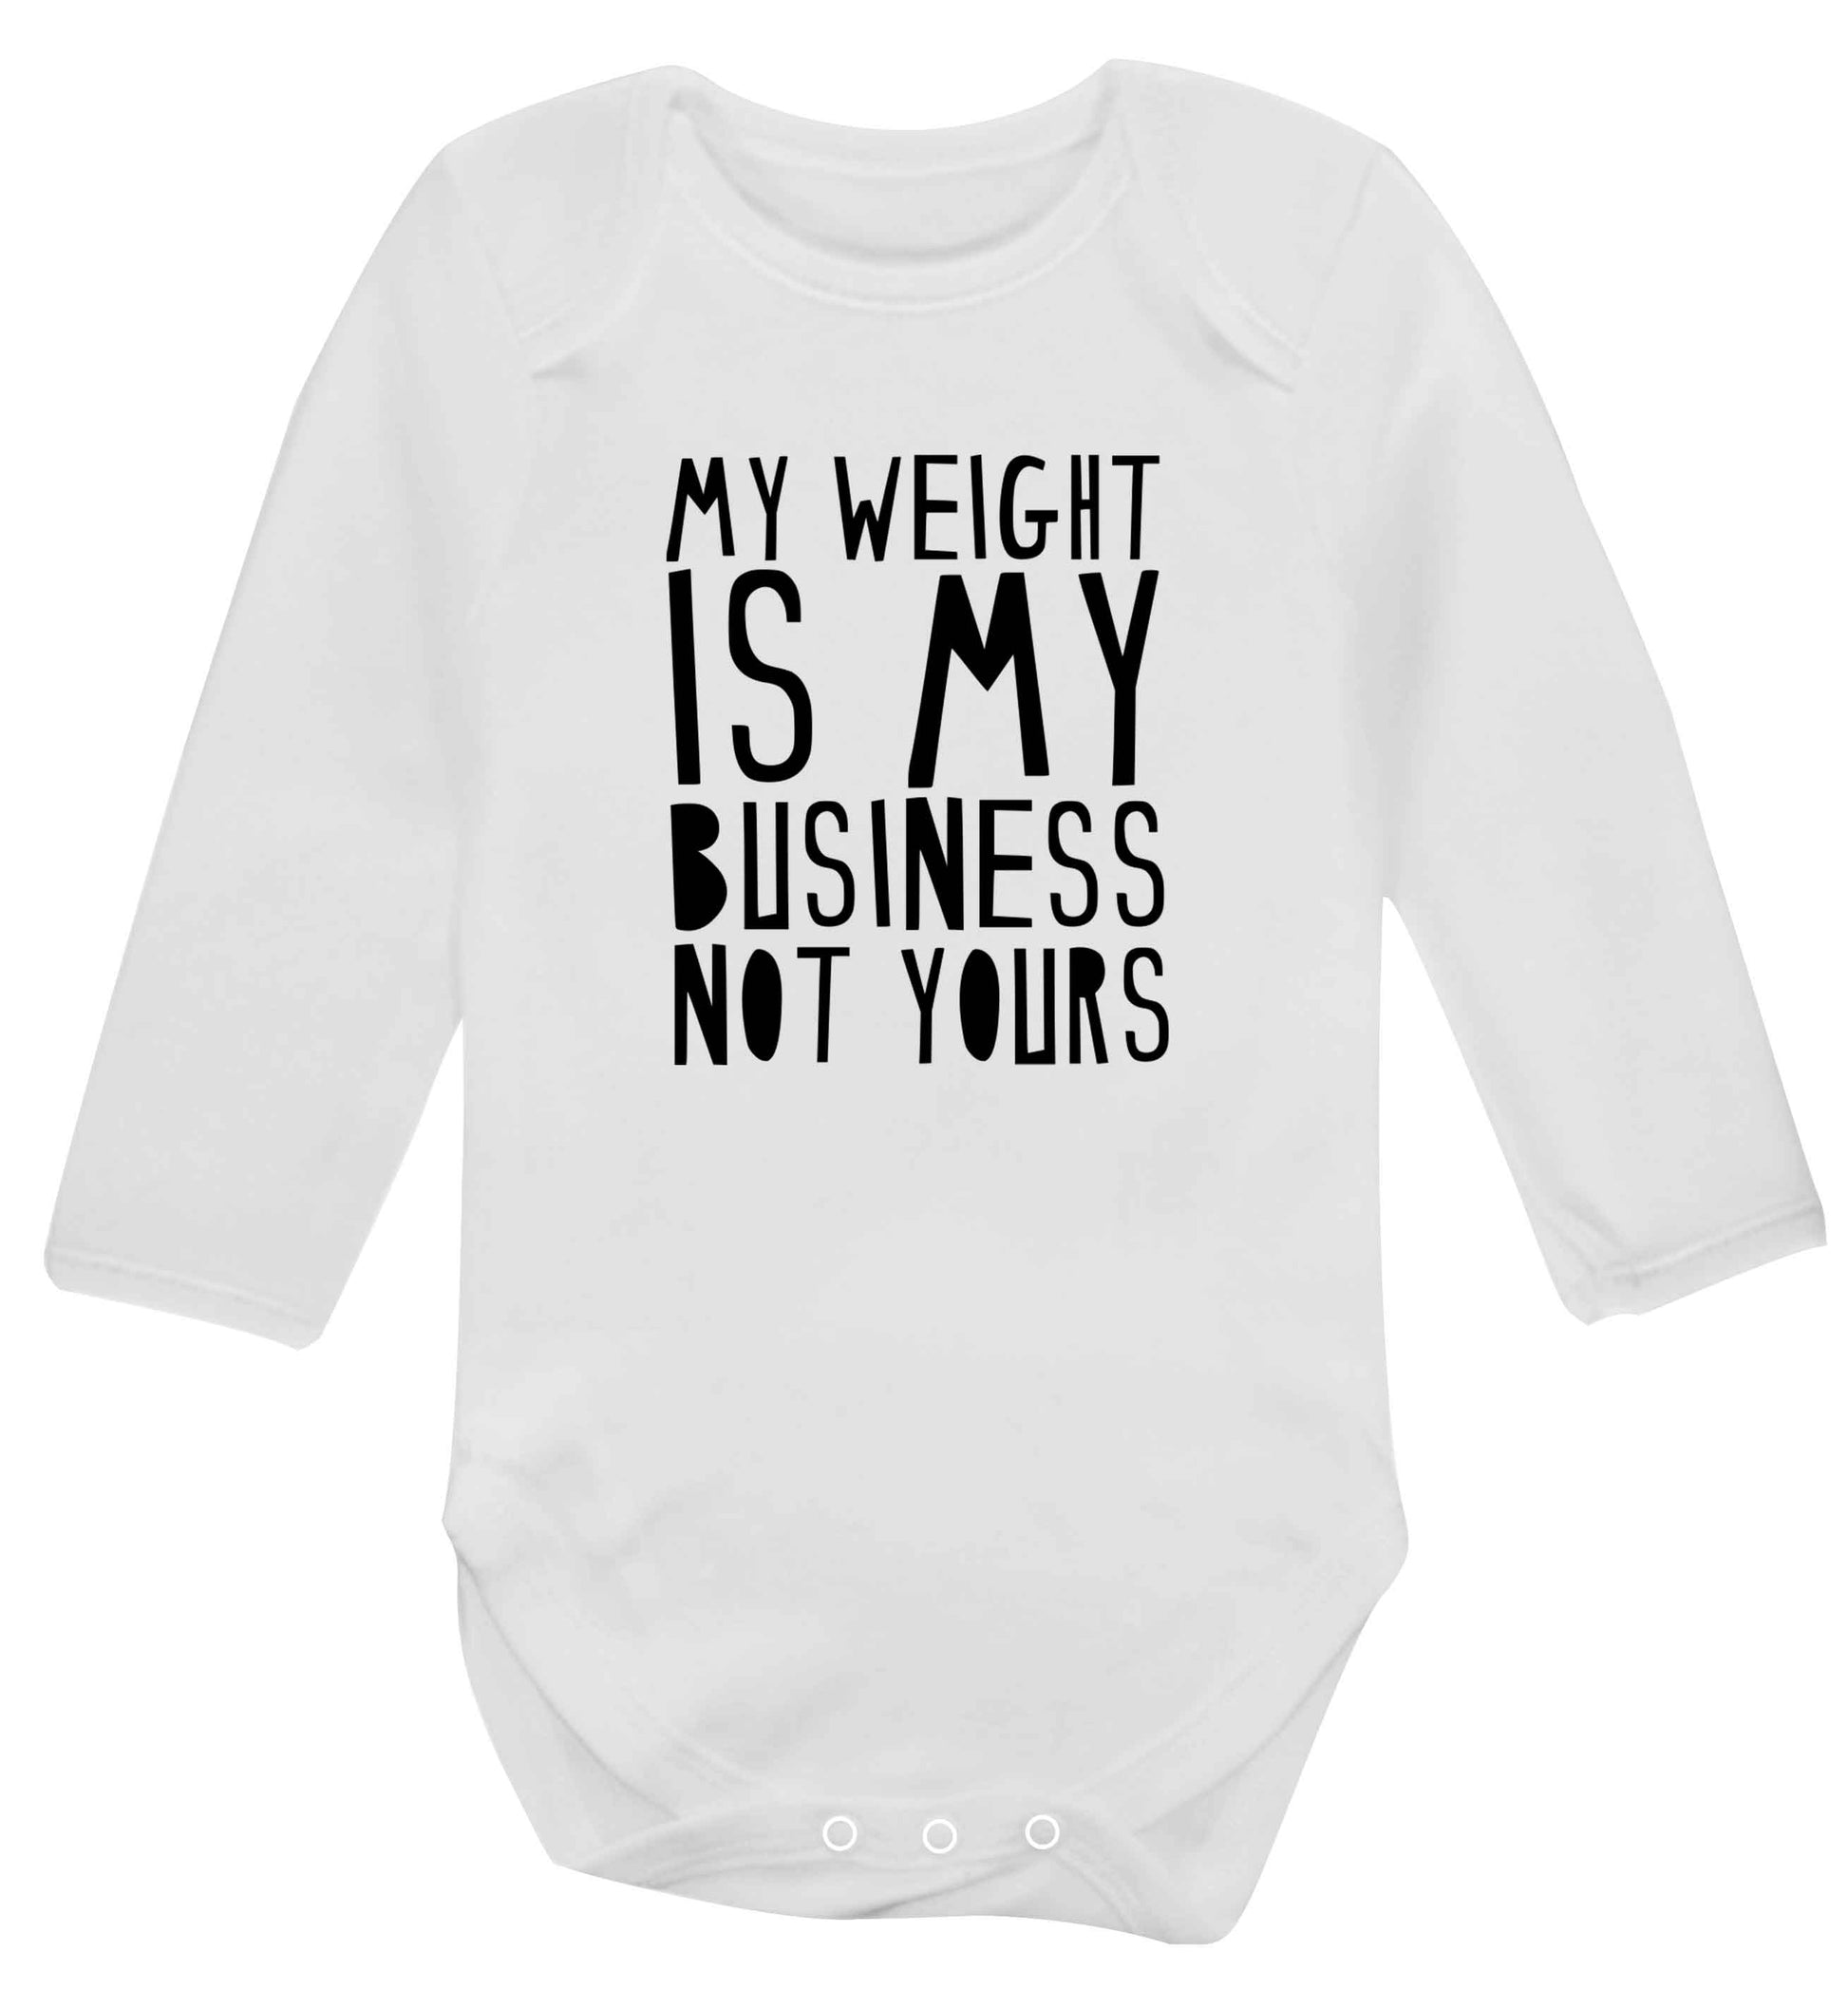 My weight is my business not yours baby vest long sleeved white 6-12 months